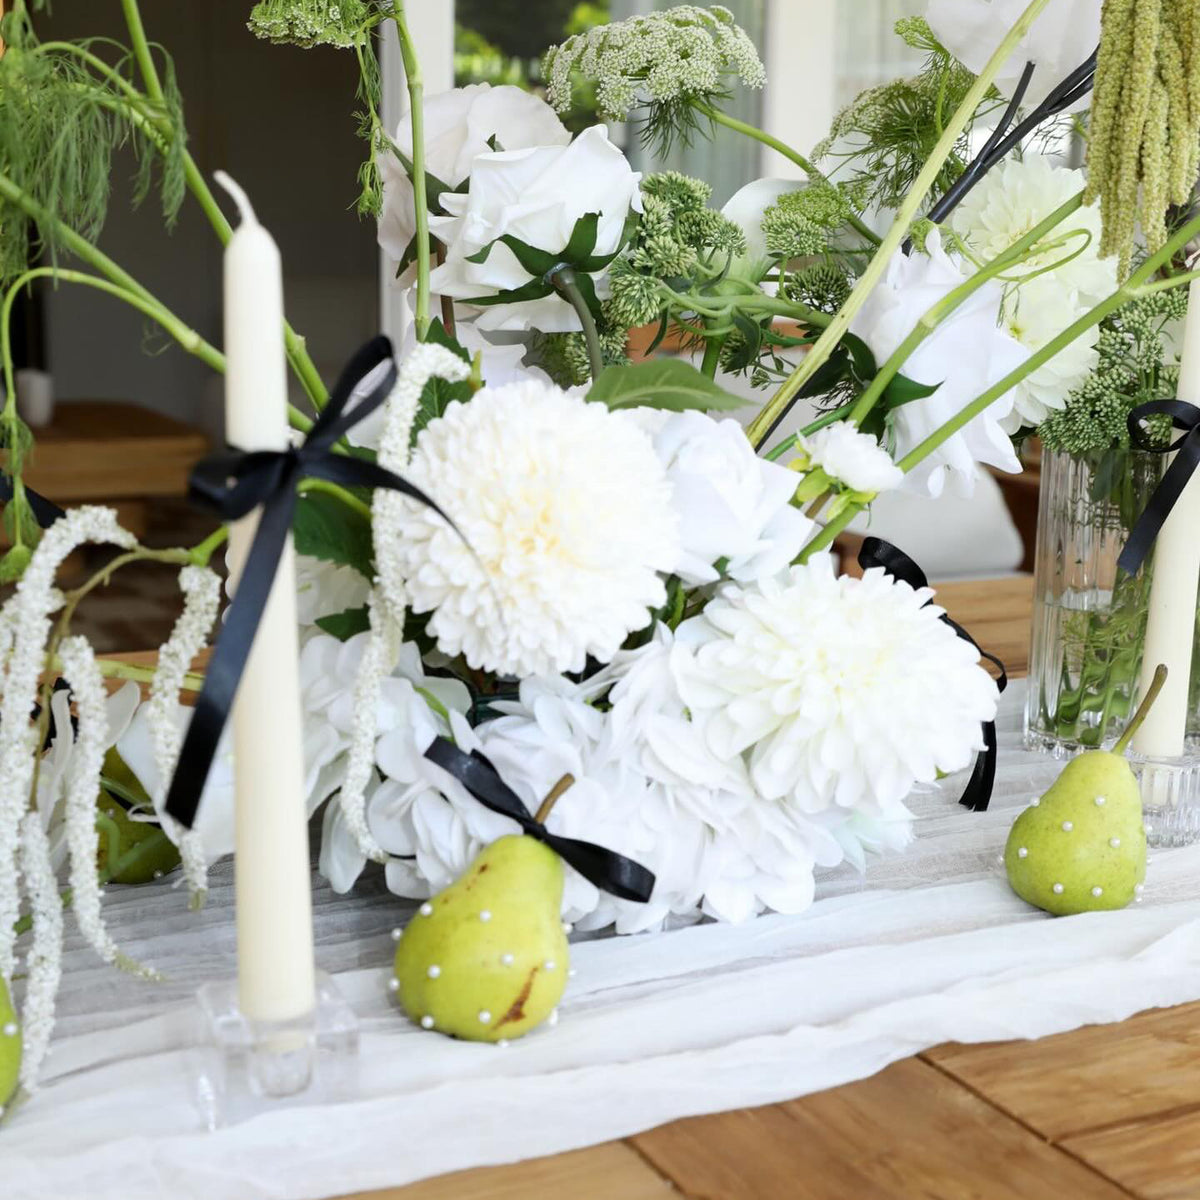 White Rustic Gauze Table Runners - 4m